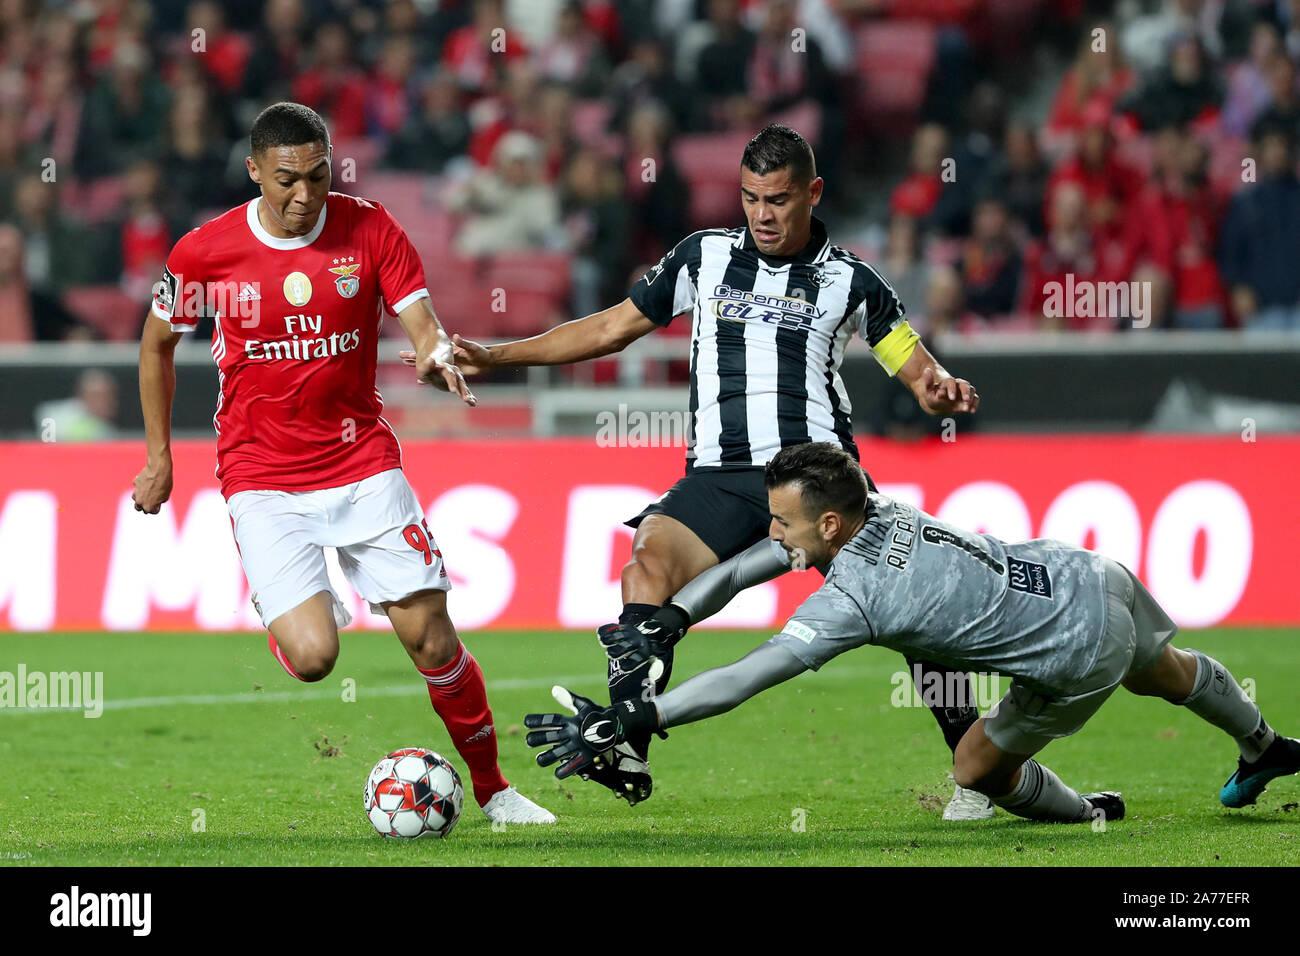 Lisbon, Portugal. 30th Oct, 2019. Carlos Vinicius (L) of Benfica vies with Portimonense's Jadson (C) and goalkeeper Ricardo Ferreira during their Portuguese League football match at the Luz stadium in Lisbon, Portugal, on Oct. 30, 2019. Credit: Pedro Fiuza/Xinhua/Alamy Live News Stock Photo